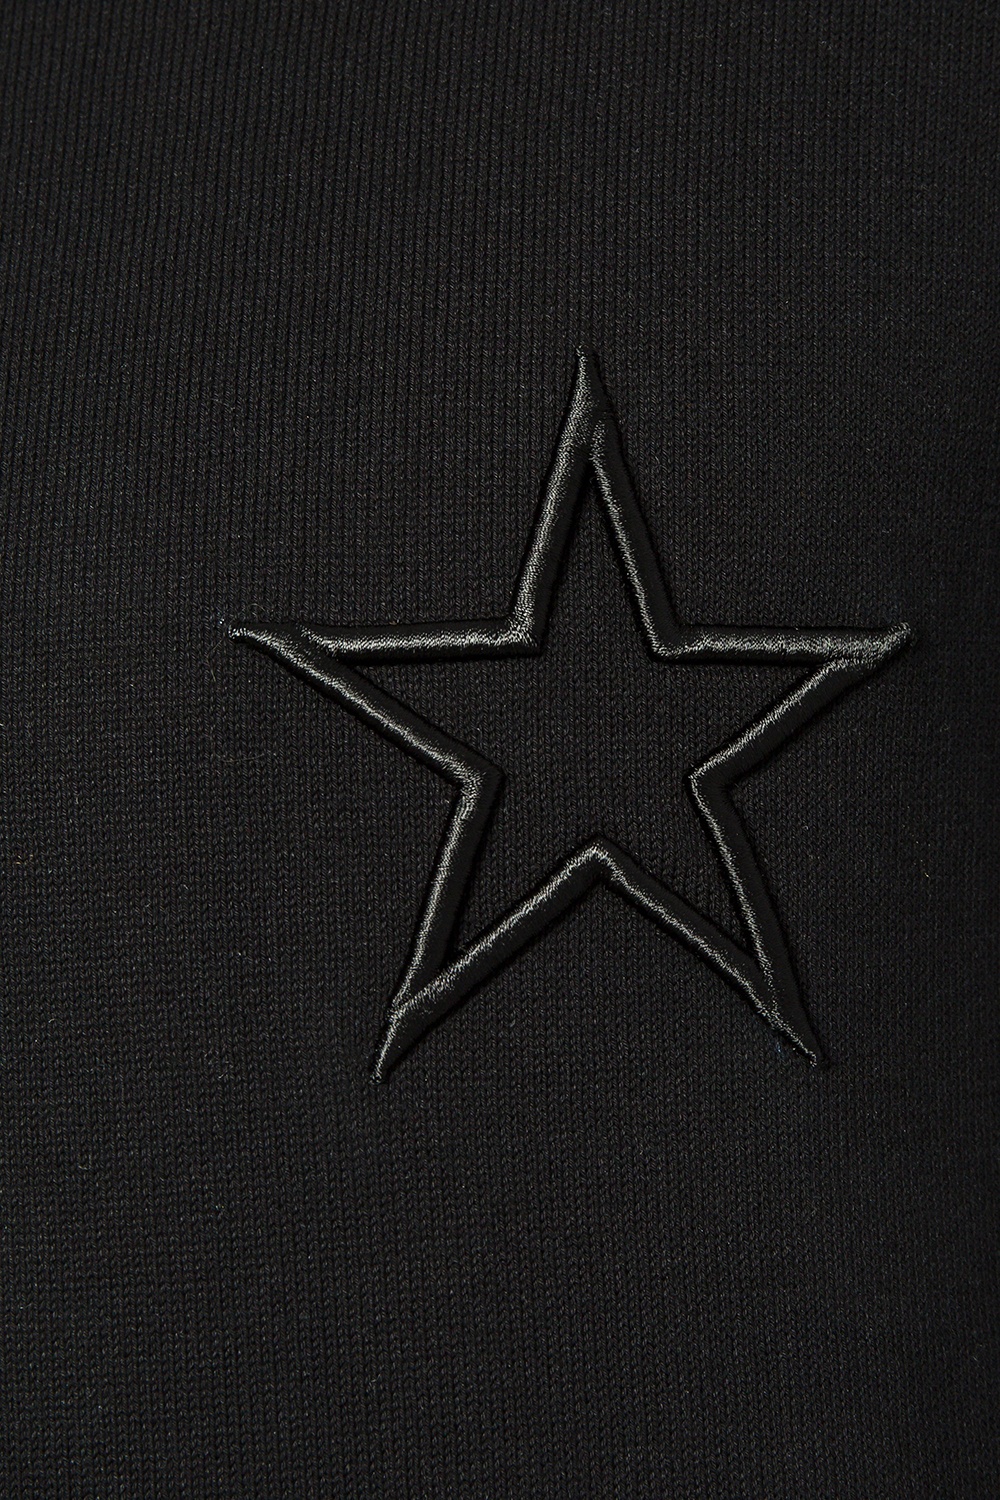 givenchy black star sweater